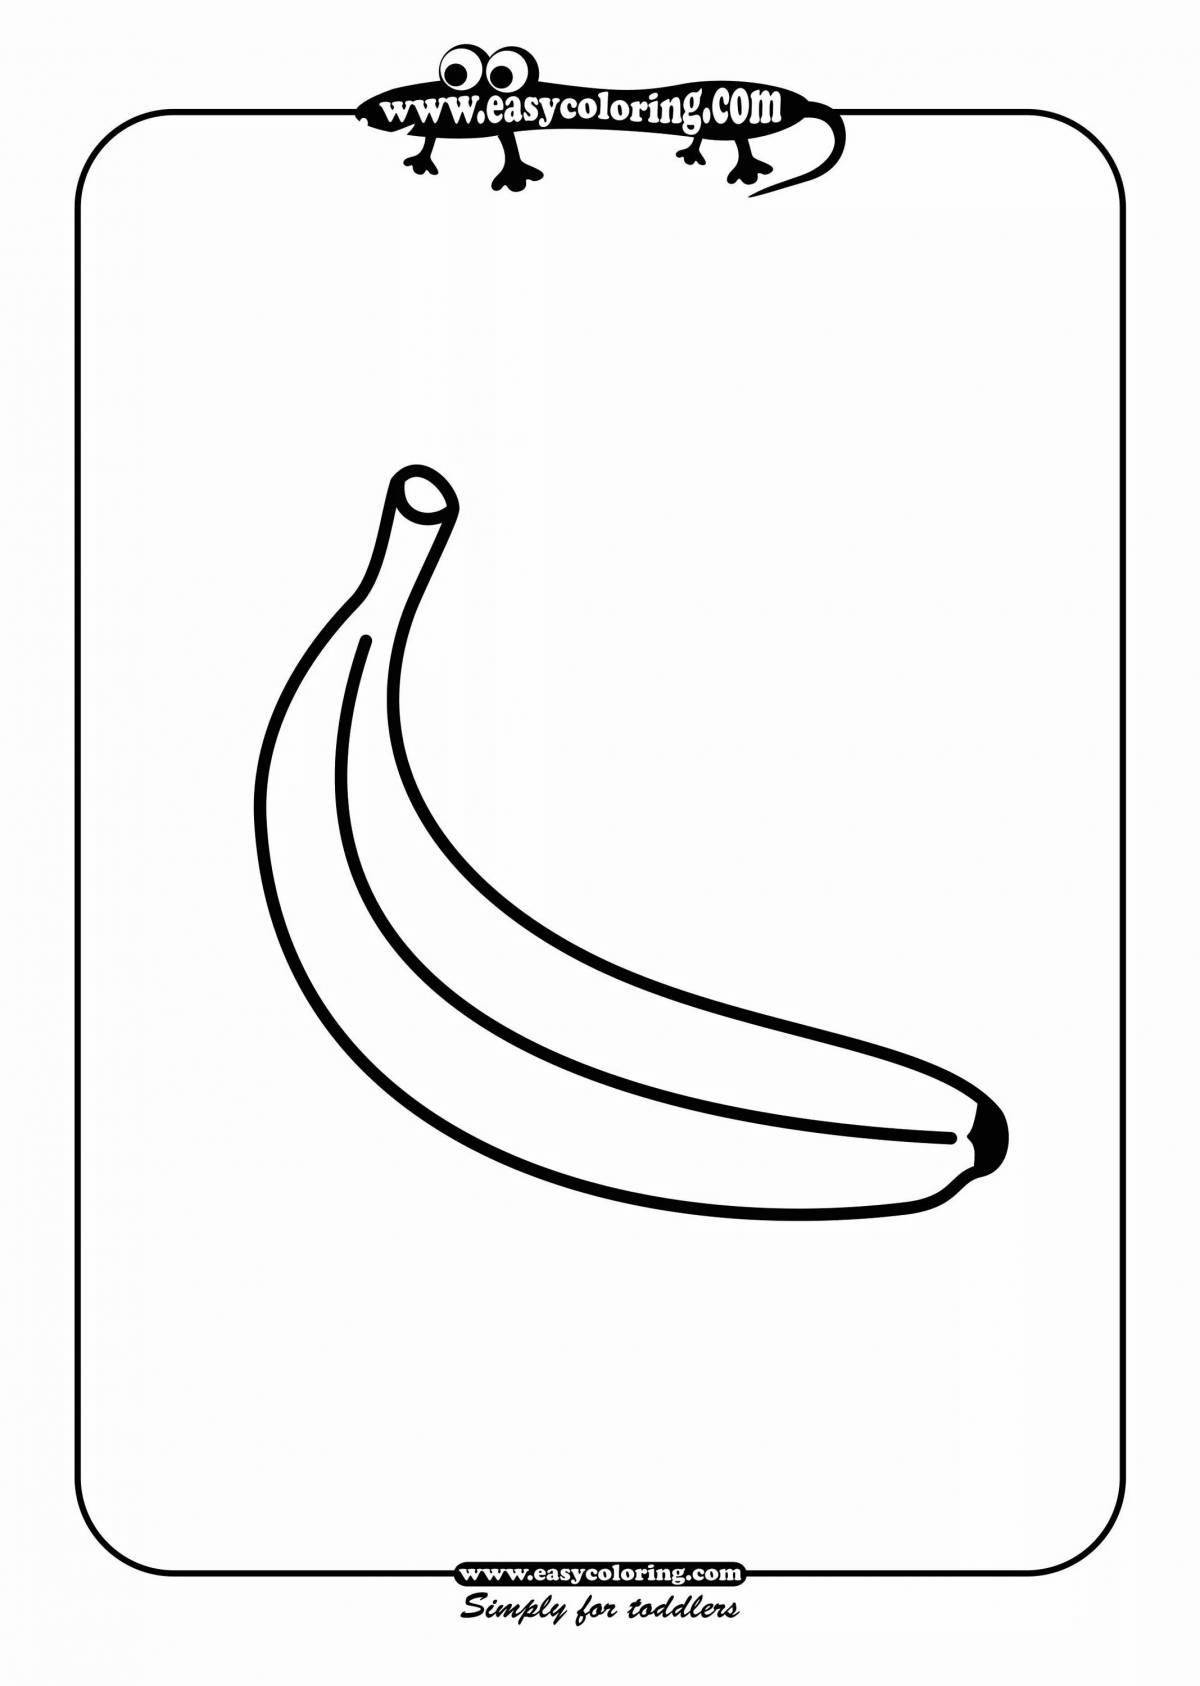 Fabulous banana coloring book for 5-6 year olds